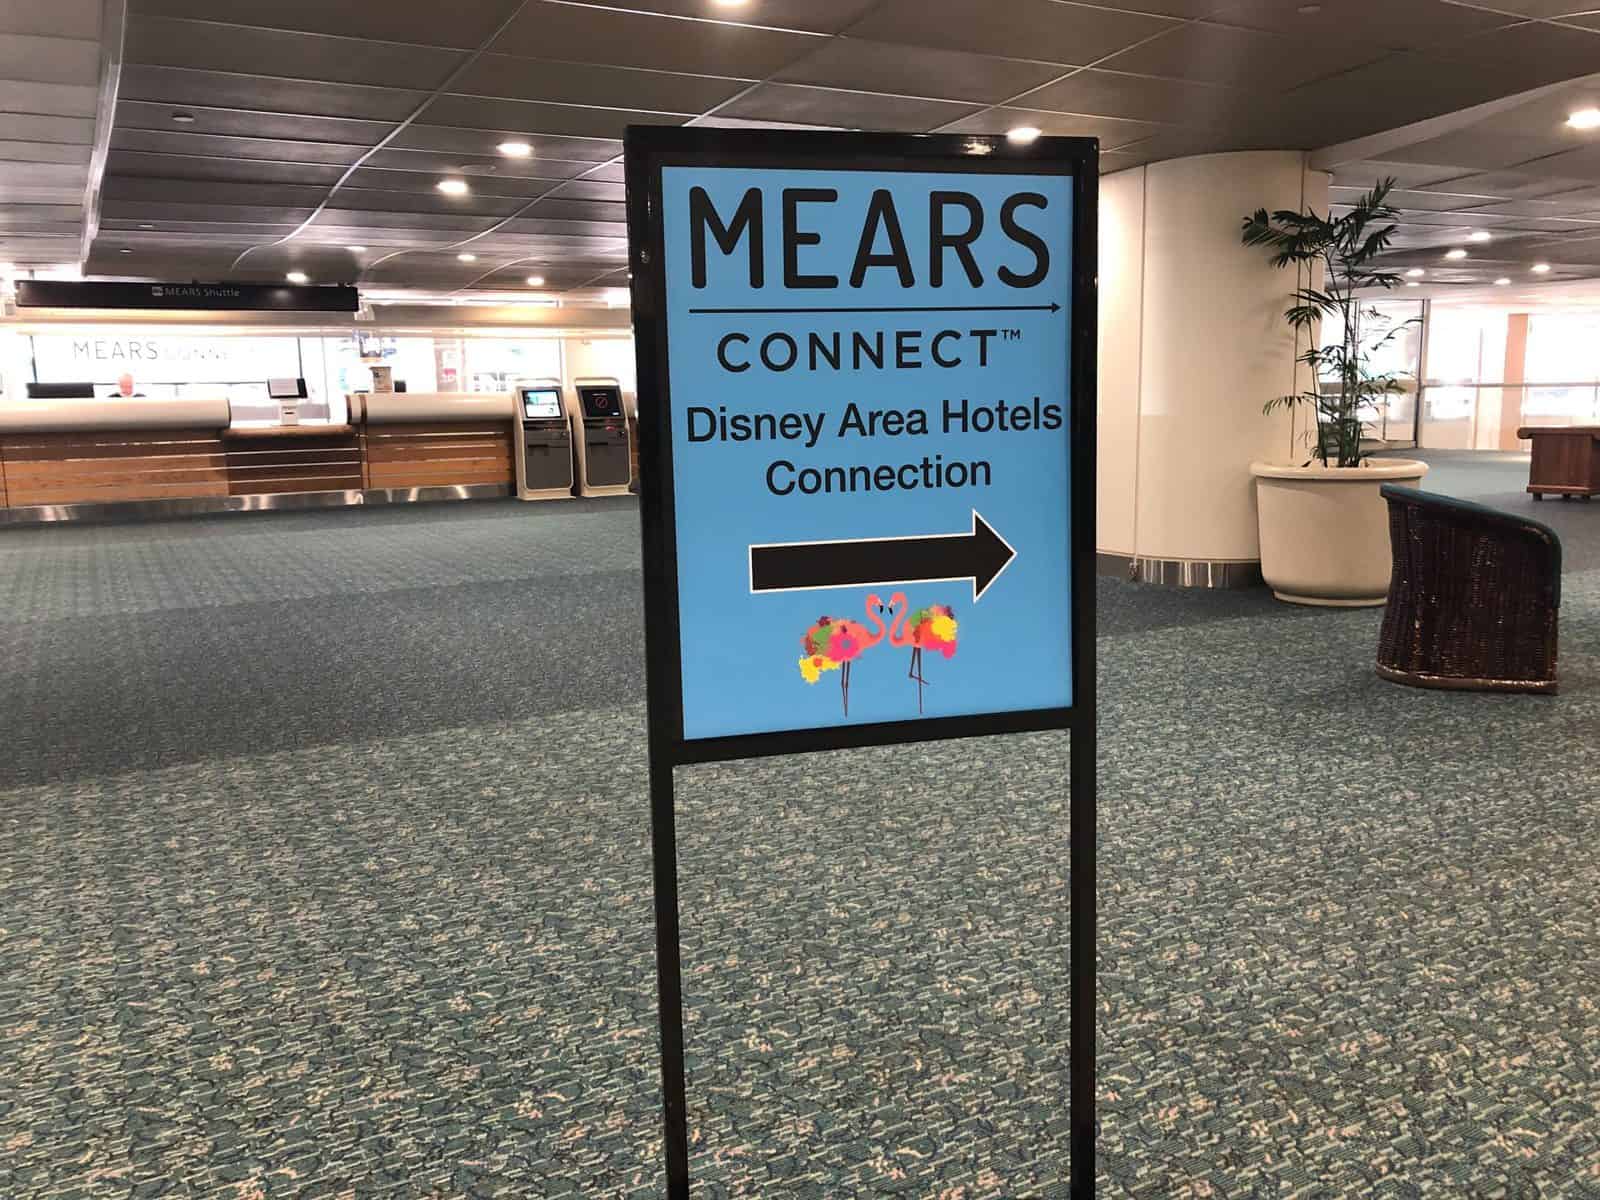 Mears Connect review: Is the airport transportation service worth your time and money?